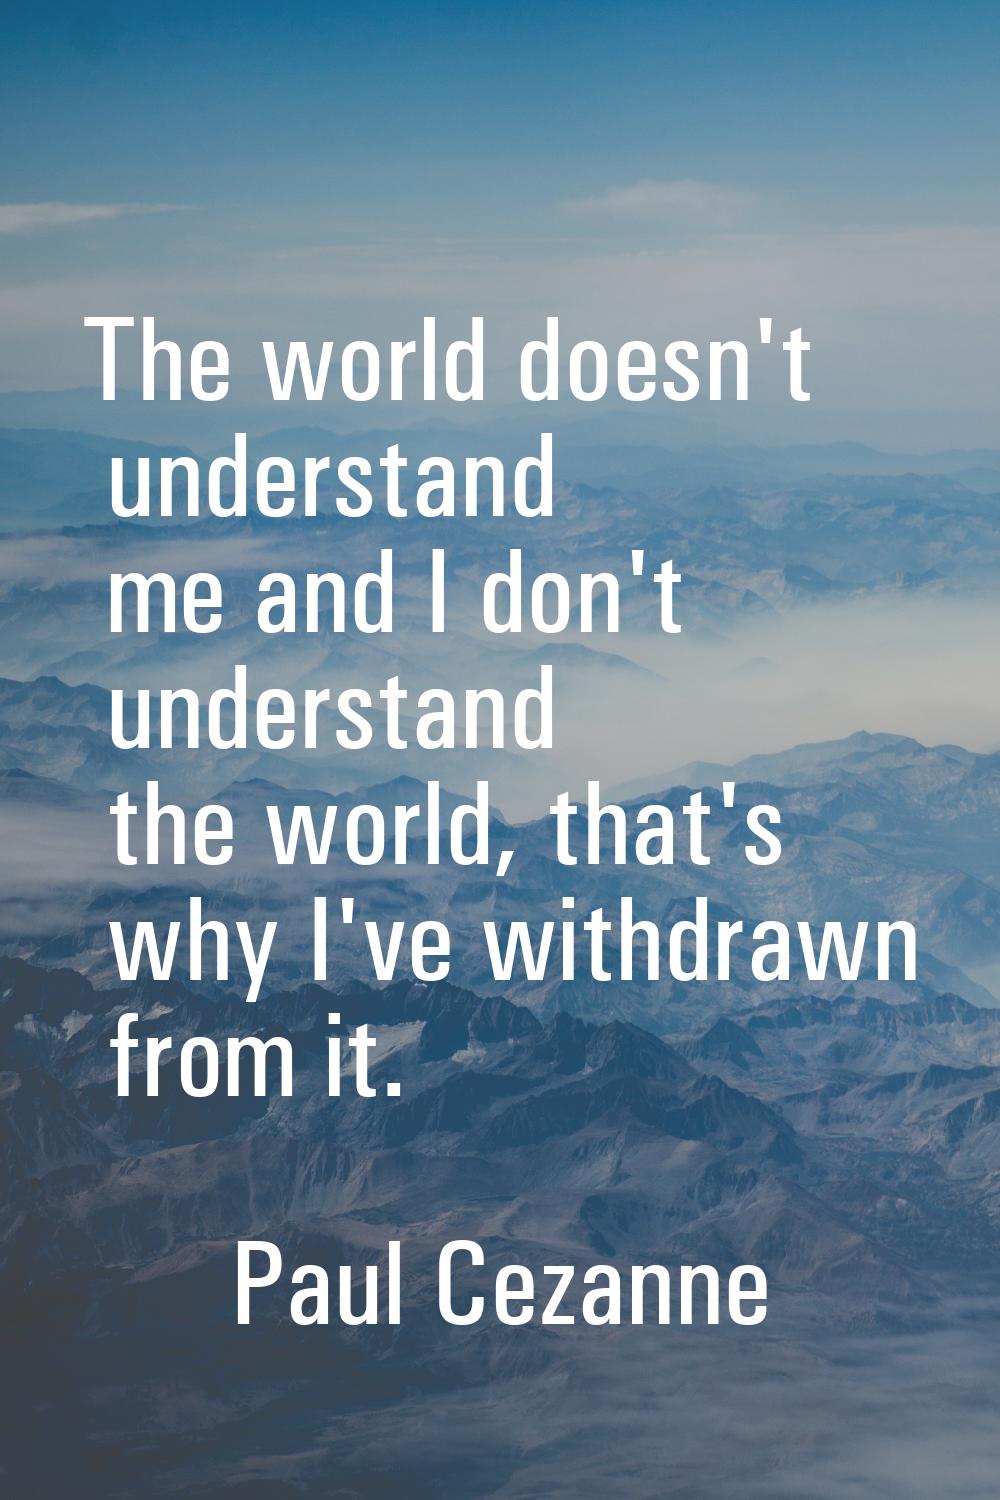 The world doesn't understand me and I don't understand the world, that's why I've withdrawn from it